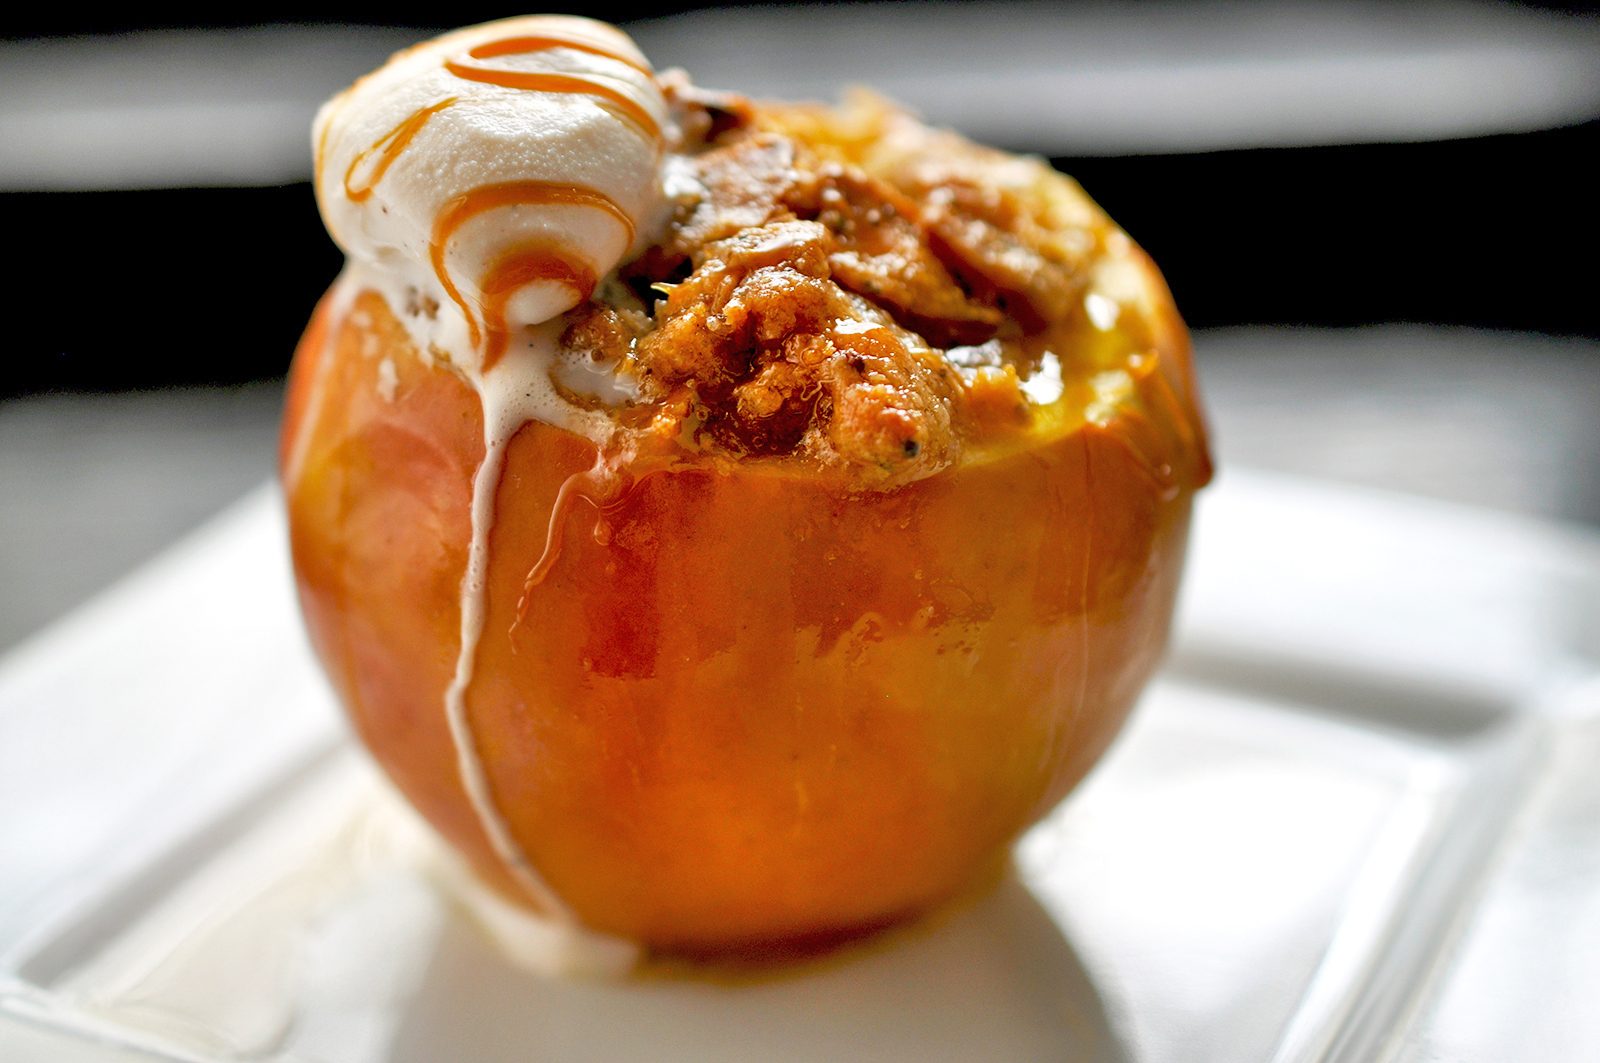 It's just like apple crisp: but tucked right back into the delicious and juicy fresh apple.